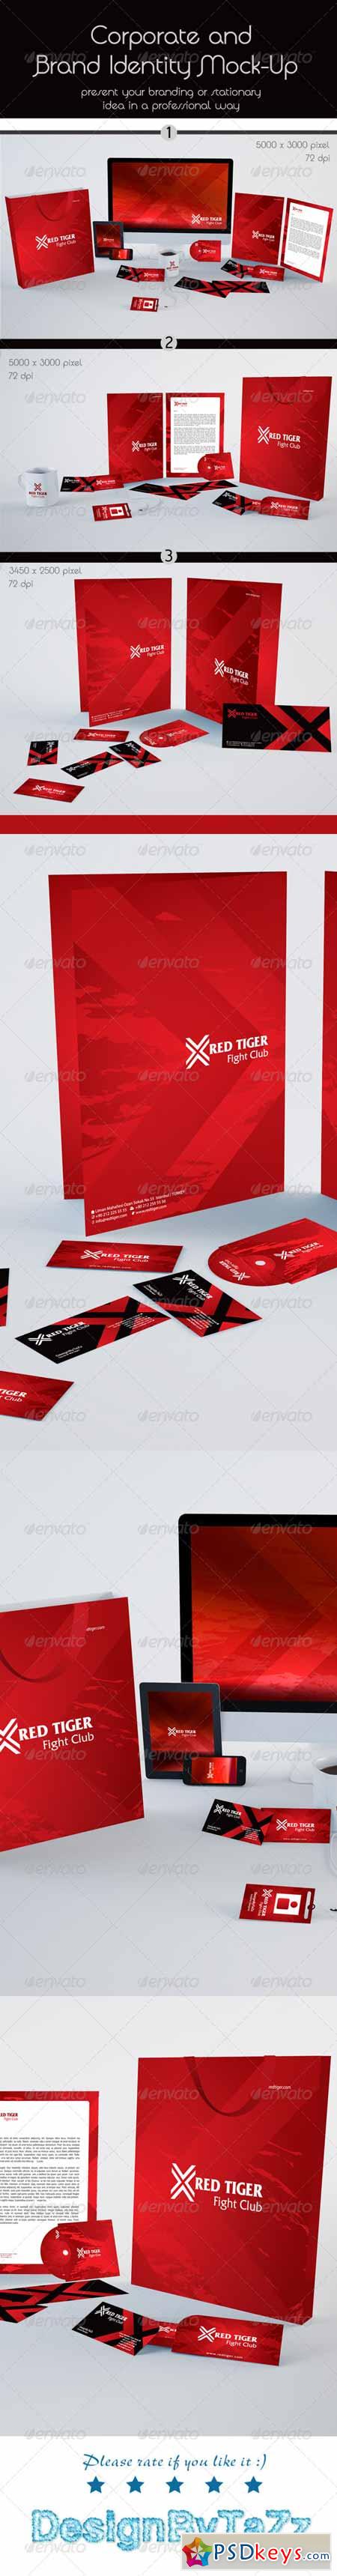 Corporate and Stationery Brand Mock-Up 3392716